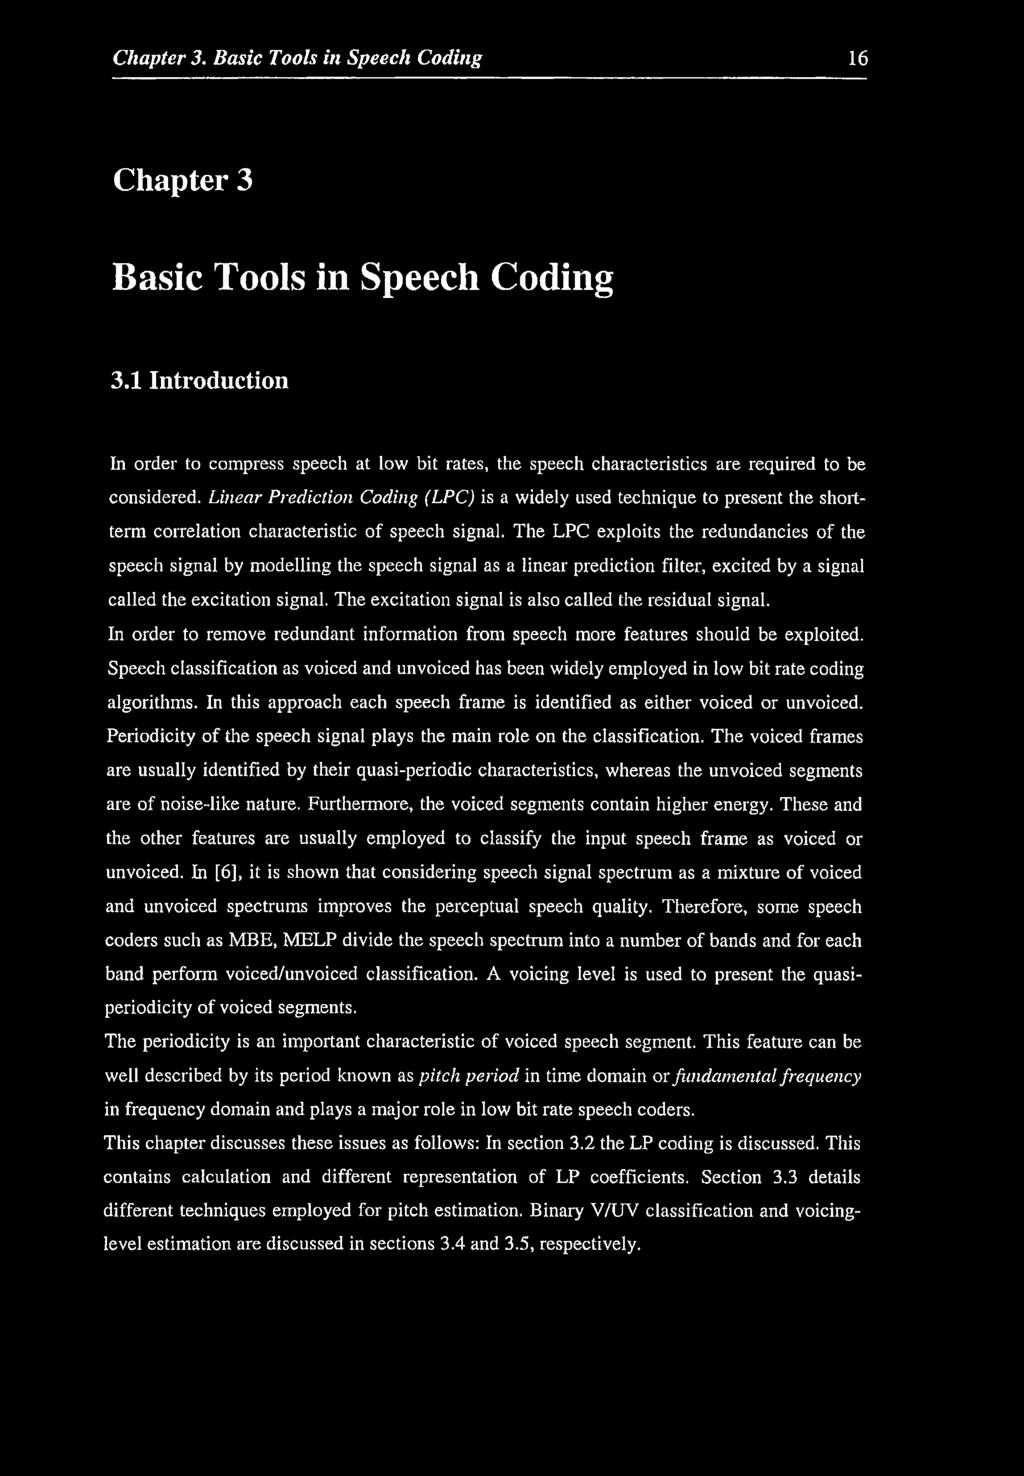 Linear Prediction Coding (LPC) is a widely used technique to present the shortterm correlation characteristic of speech signal.